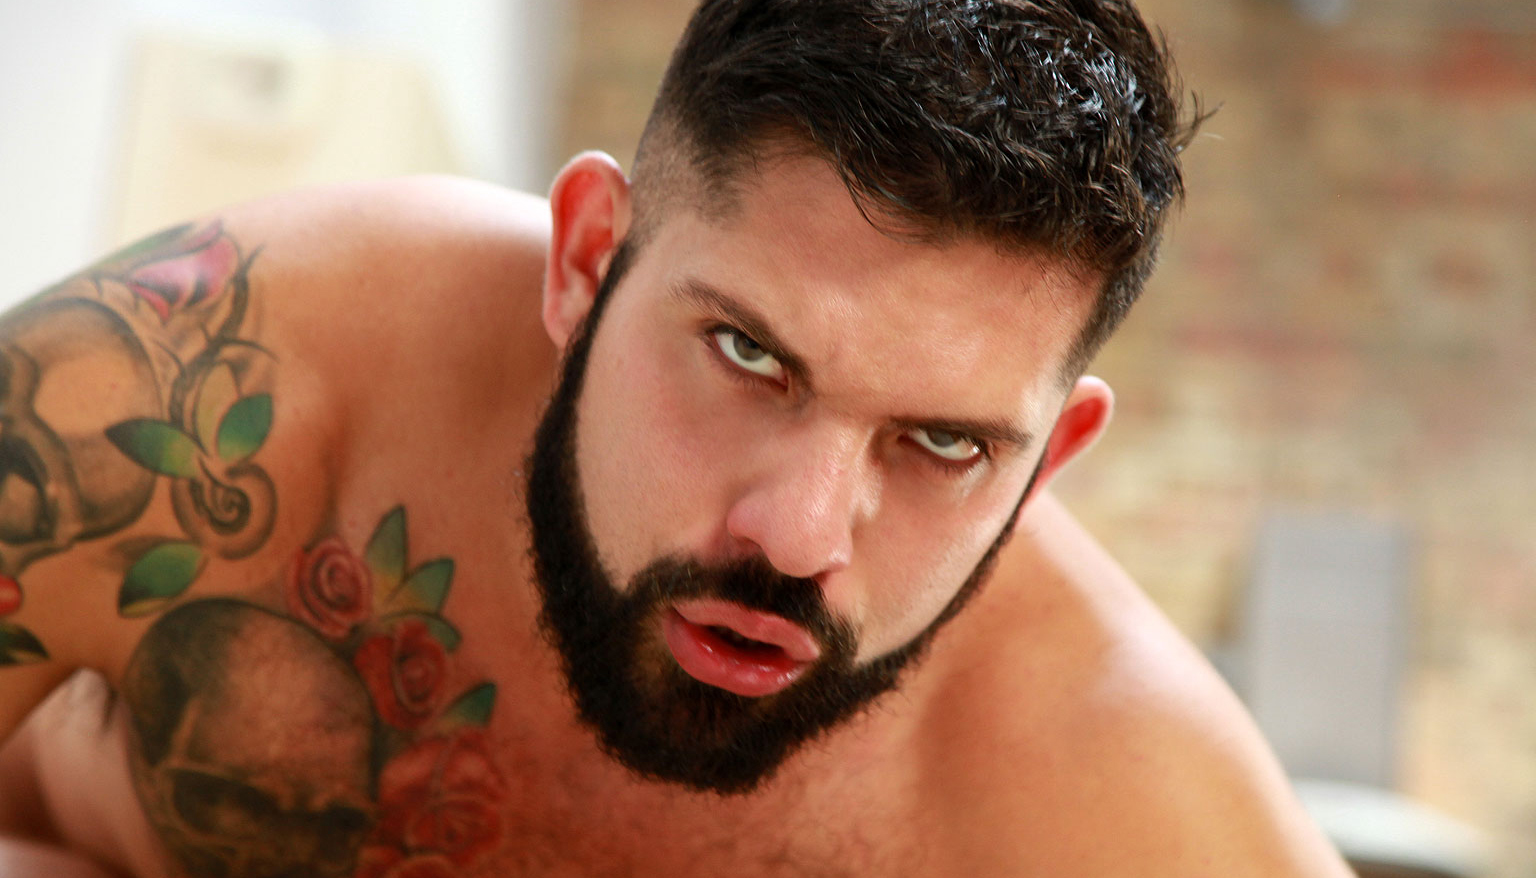 Woof Alert: Alessandro Del Toro Is A Beefy Fuck Machine – Manhunt Daily